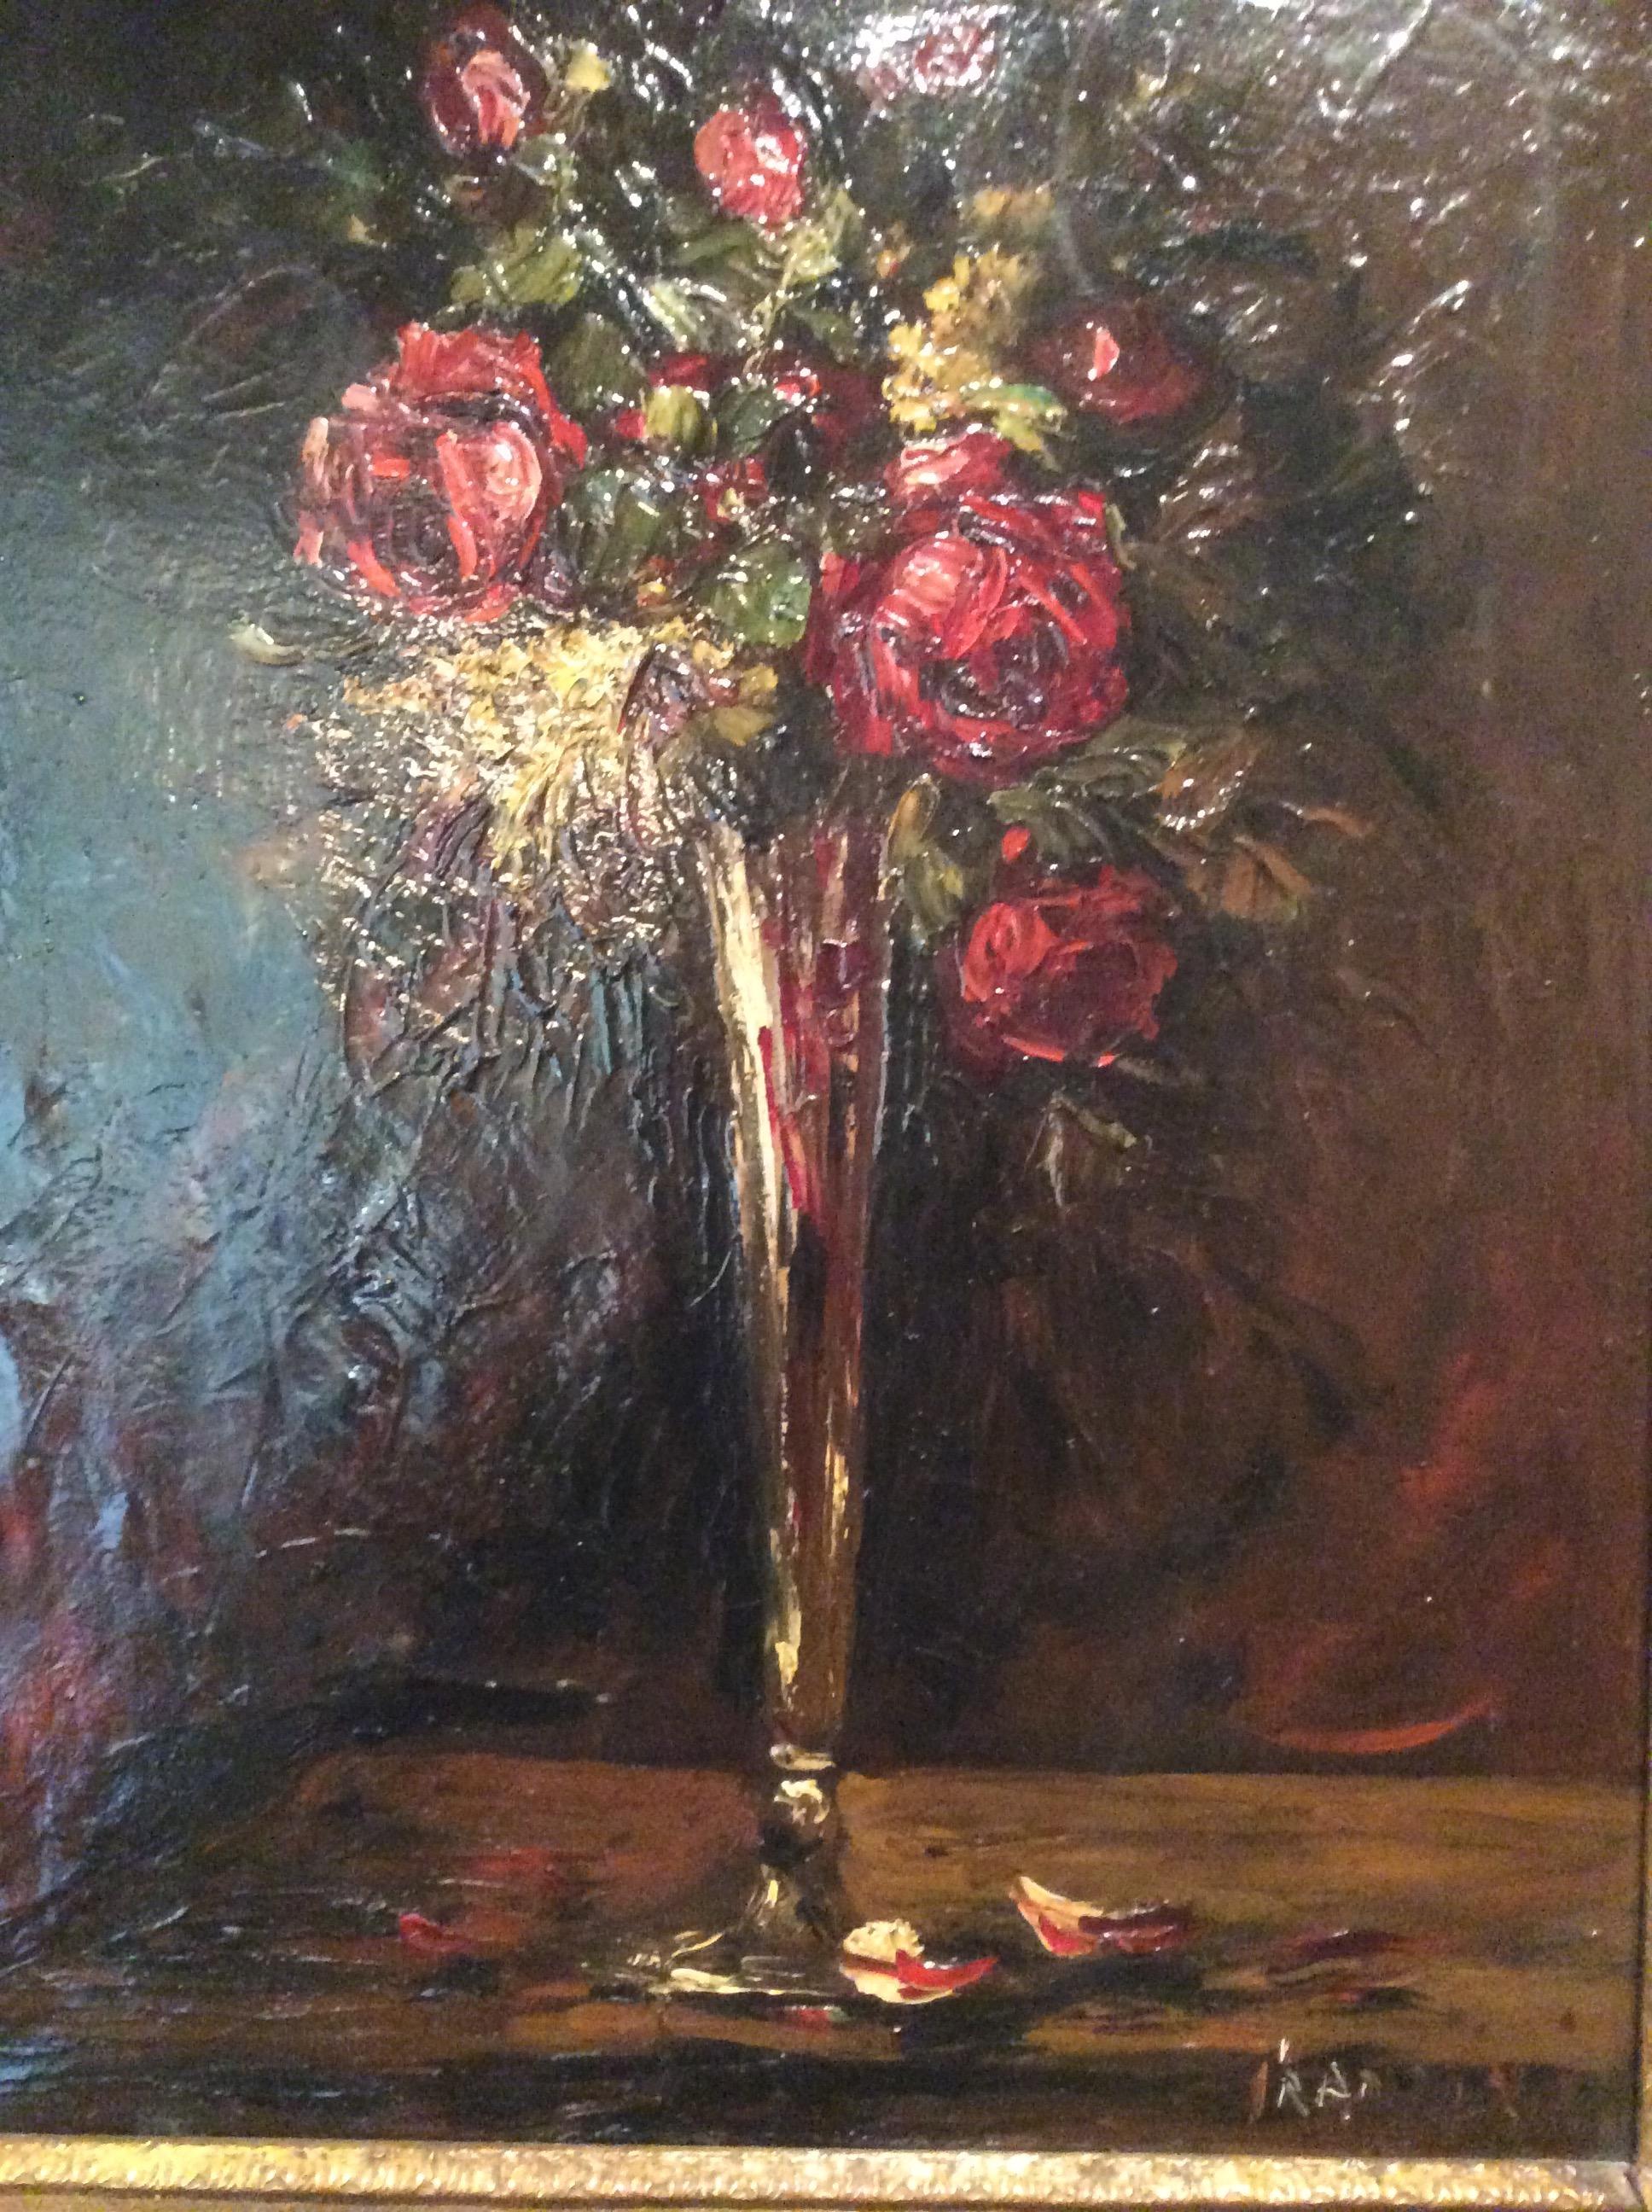 This captivating 19th-century still life oil painting by the award-winning French artist Charles Henri Franzini d'Issoncourt is a testament to his artistic talent. Recognized at the prestigious Paris Universal Exposition in 1900, d'Issoncourt